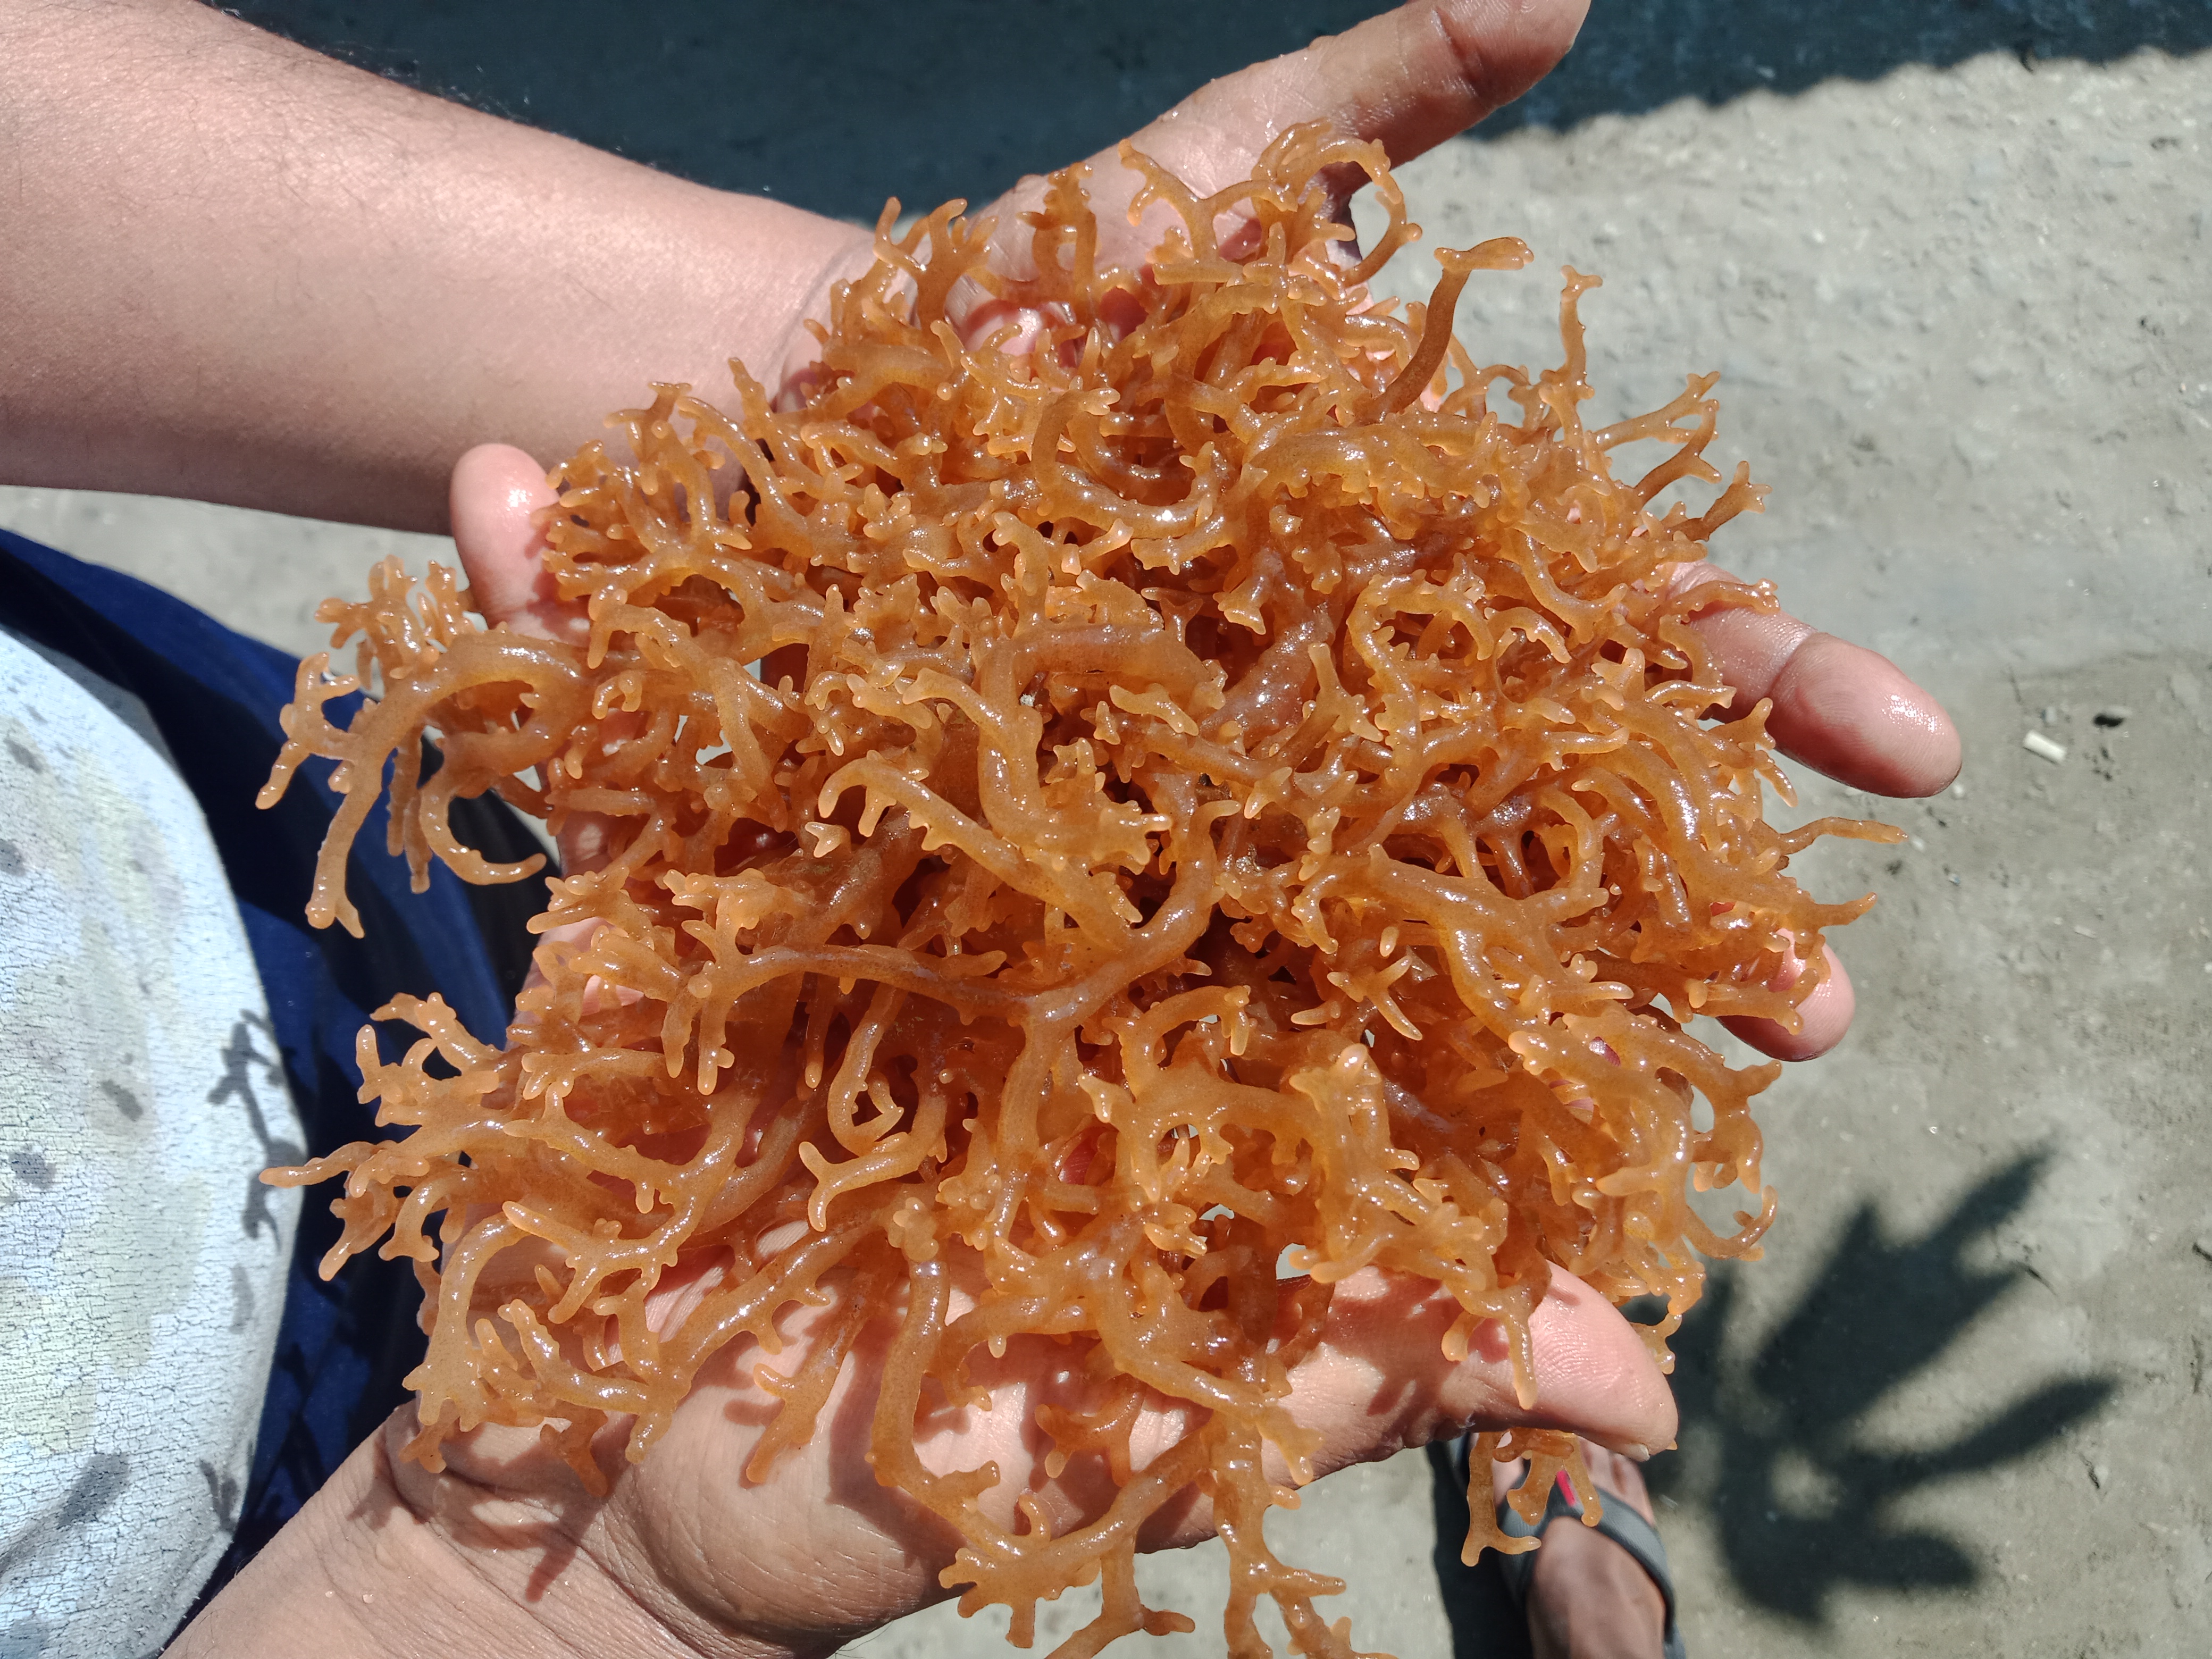 Real vs Fake Seamoss: Identifying Genuine Seaweed Products